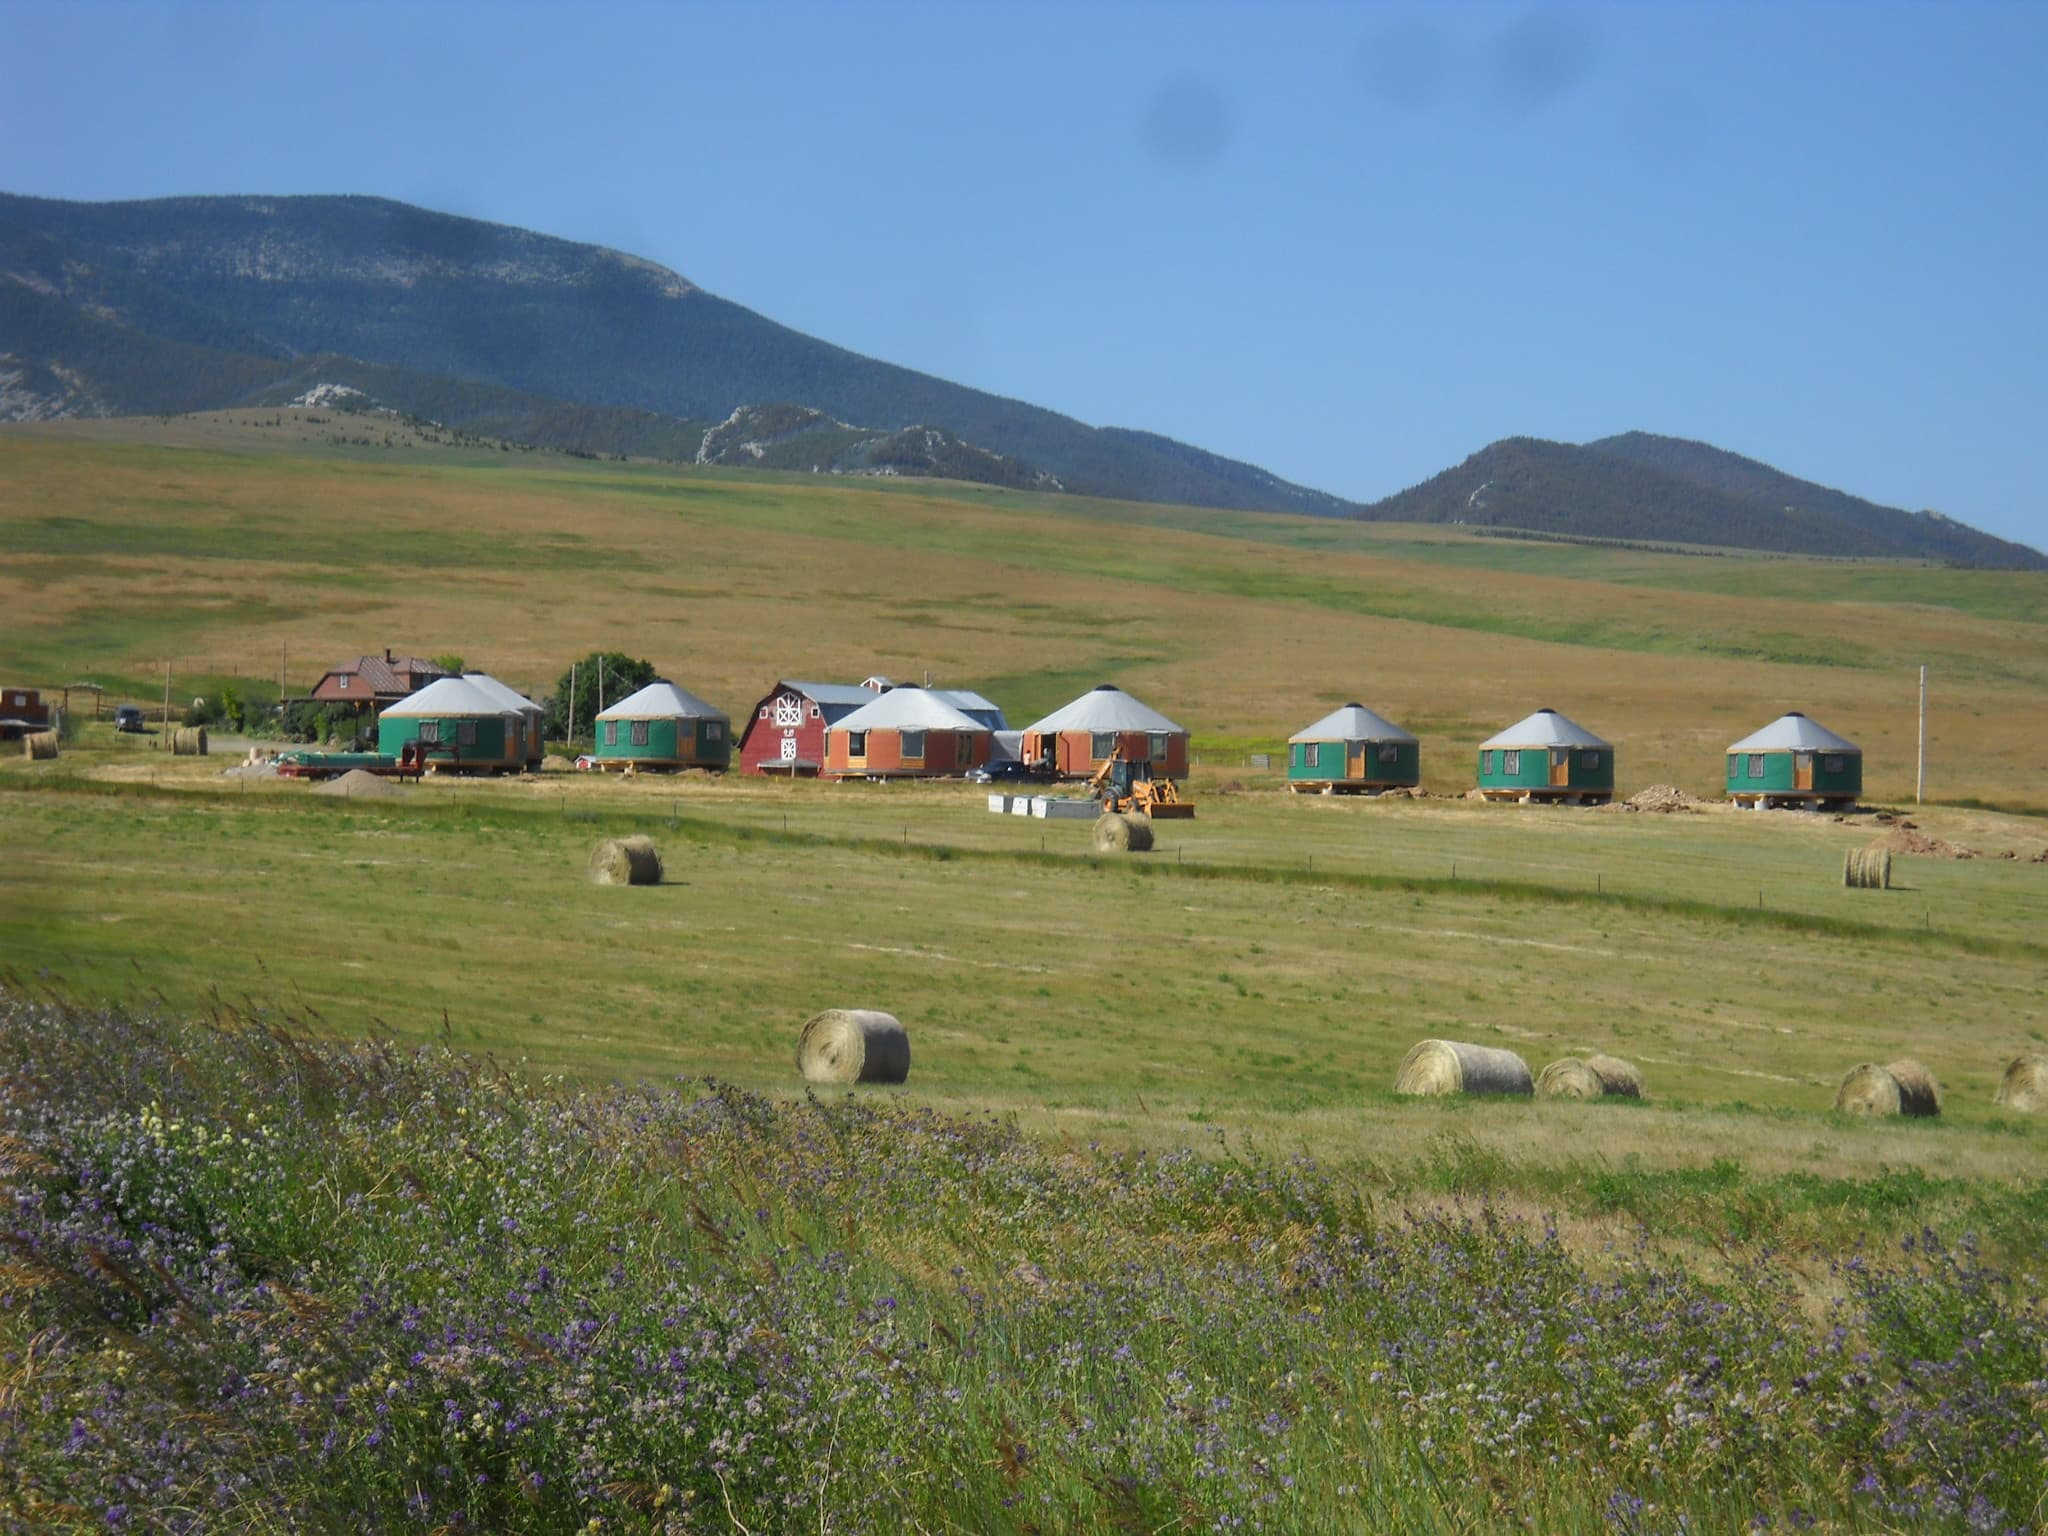 a group of shelter designs yurts on the plains